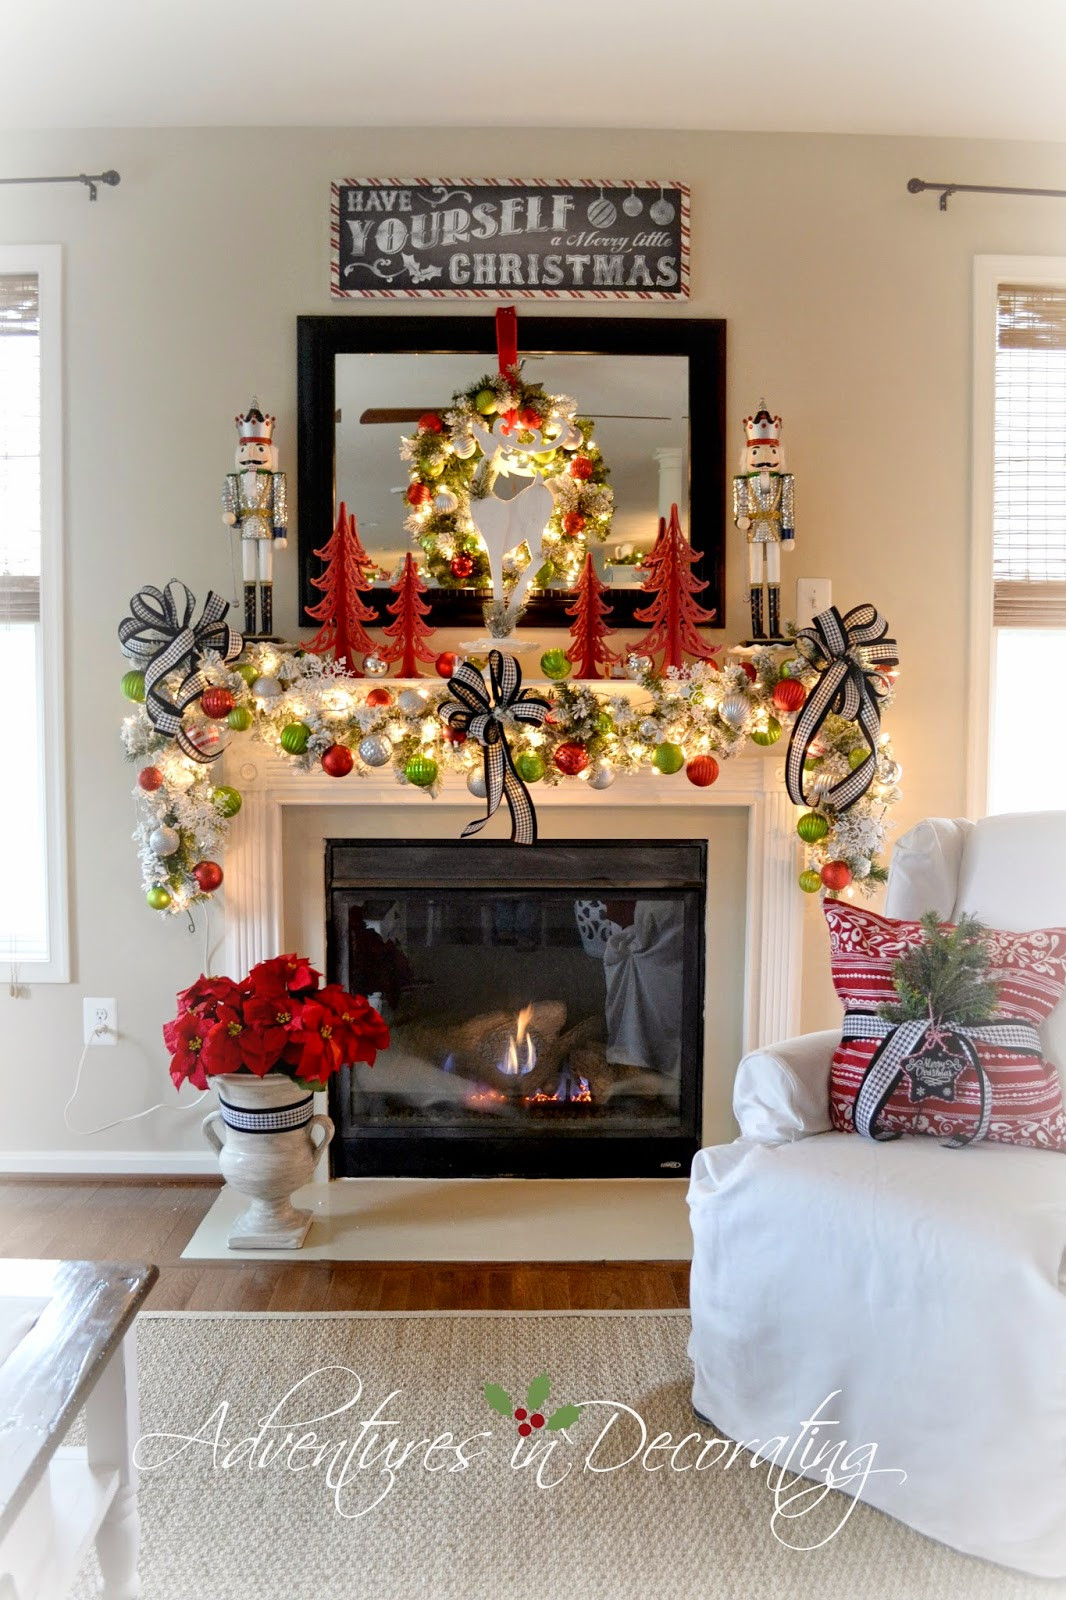 Christmas Fireplace Mantle Ideas
 Adventures in Decorating Our 2014 Christmas Mantel and